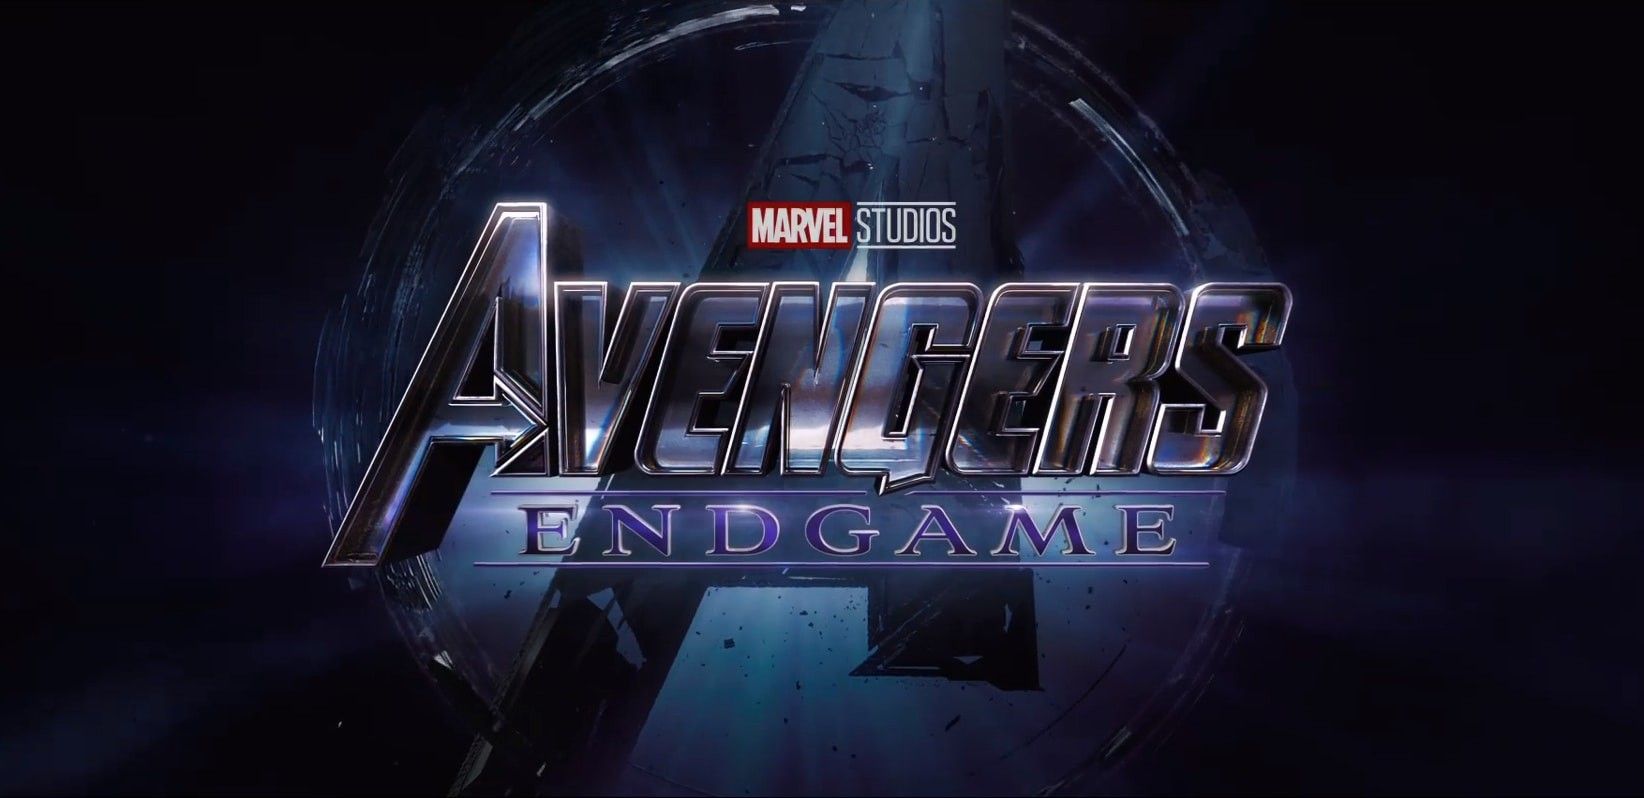 New details about 'Avengers: Endgame' unveiled in latest trailer